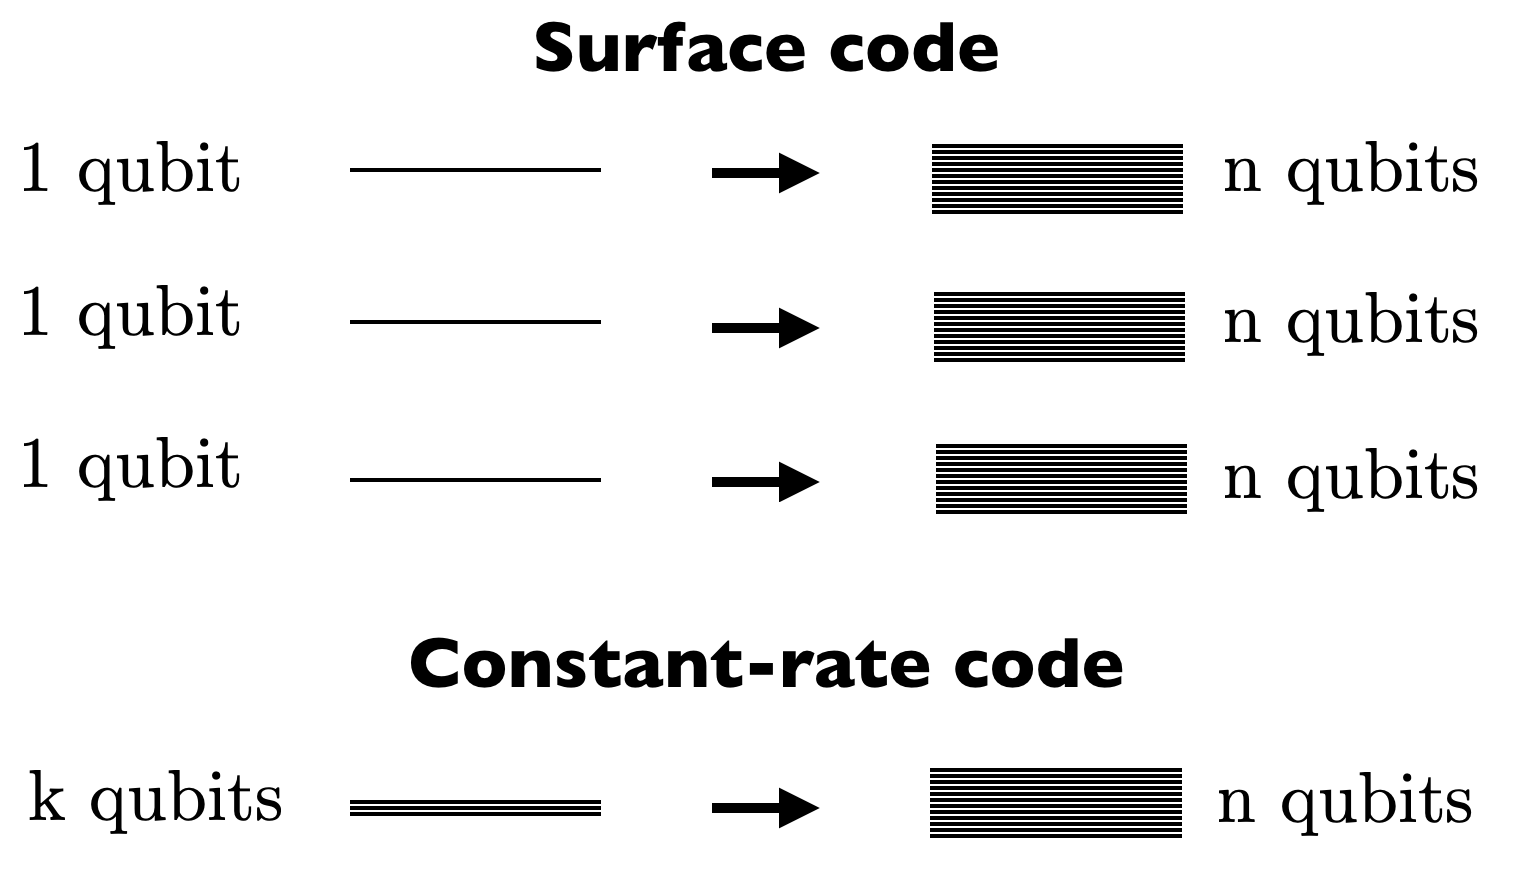 When using the surface code for fault-tolerance, each qubit of the original circuit is encoded in a separate block, leading to a large memory overhead. When using constant-rate codes, all the qubits of the original circuit are encoded in the same block which leads to important savings in terms of overhead.